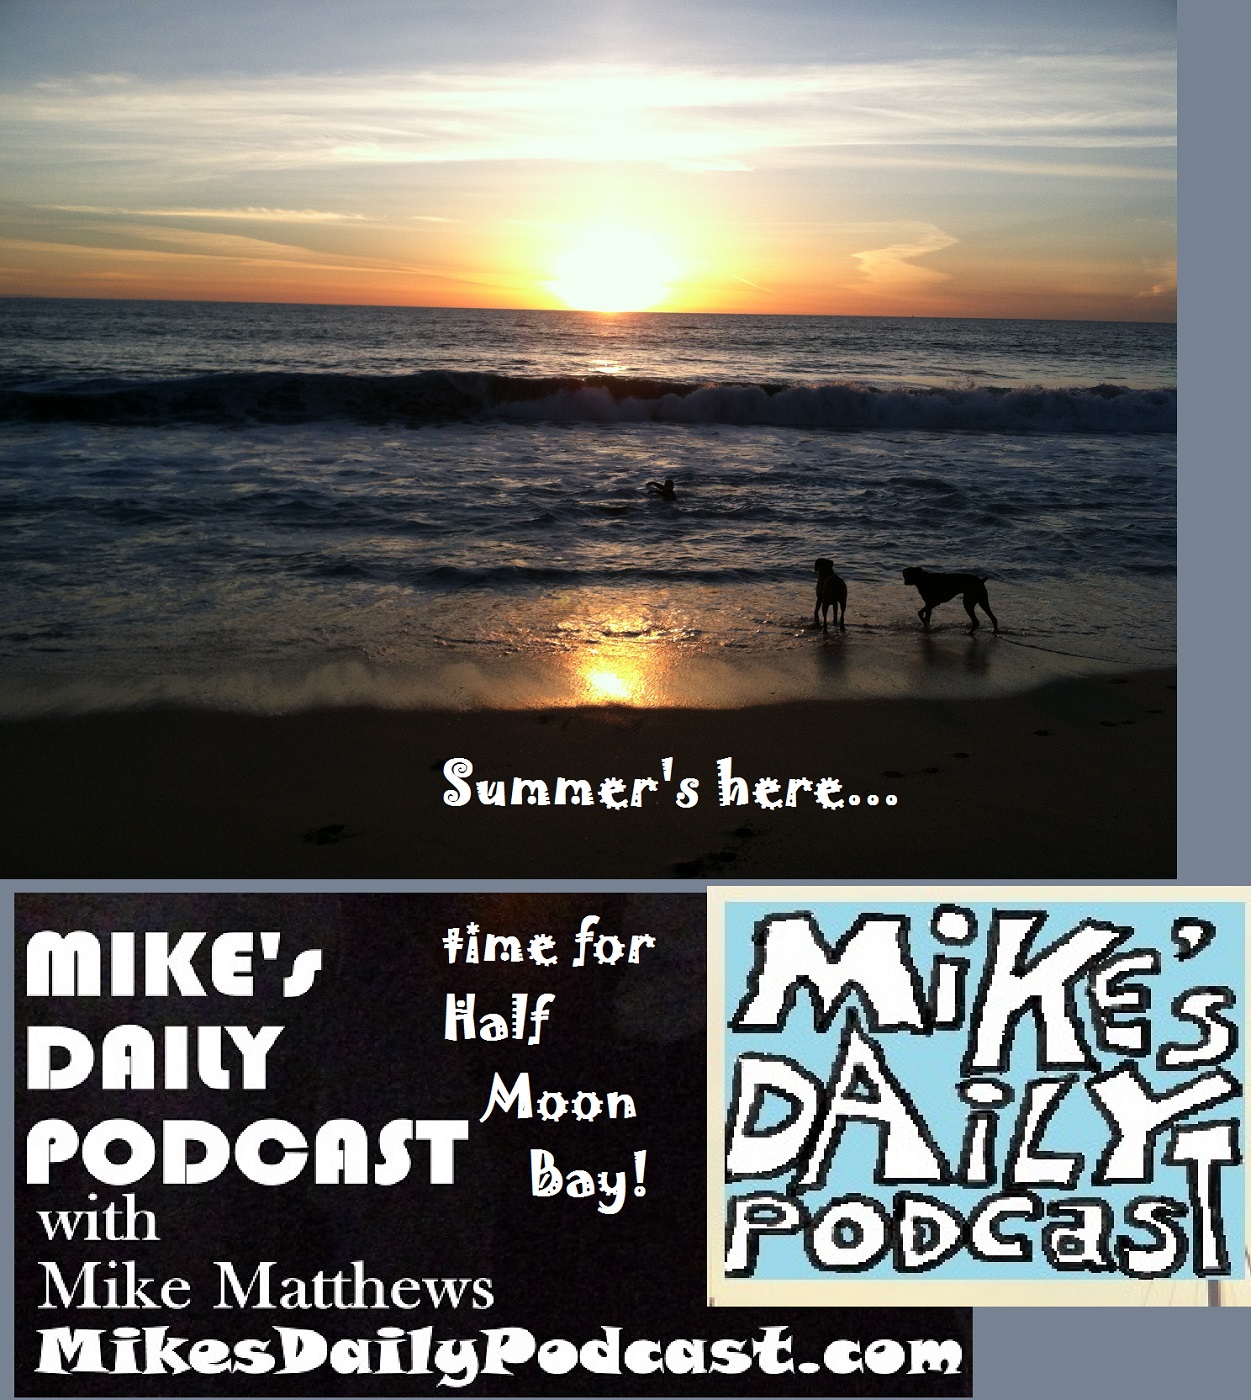 MIKEs DAILY PODCAST 1101 Half Moon Bay sunset dogs